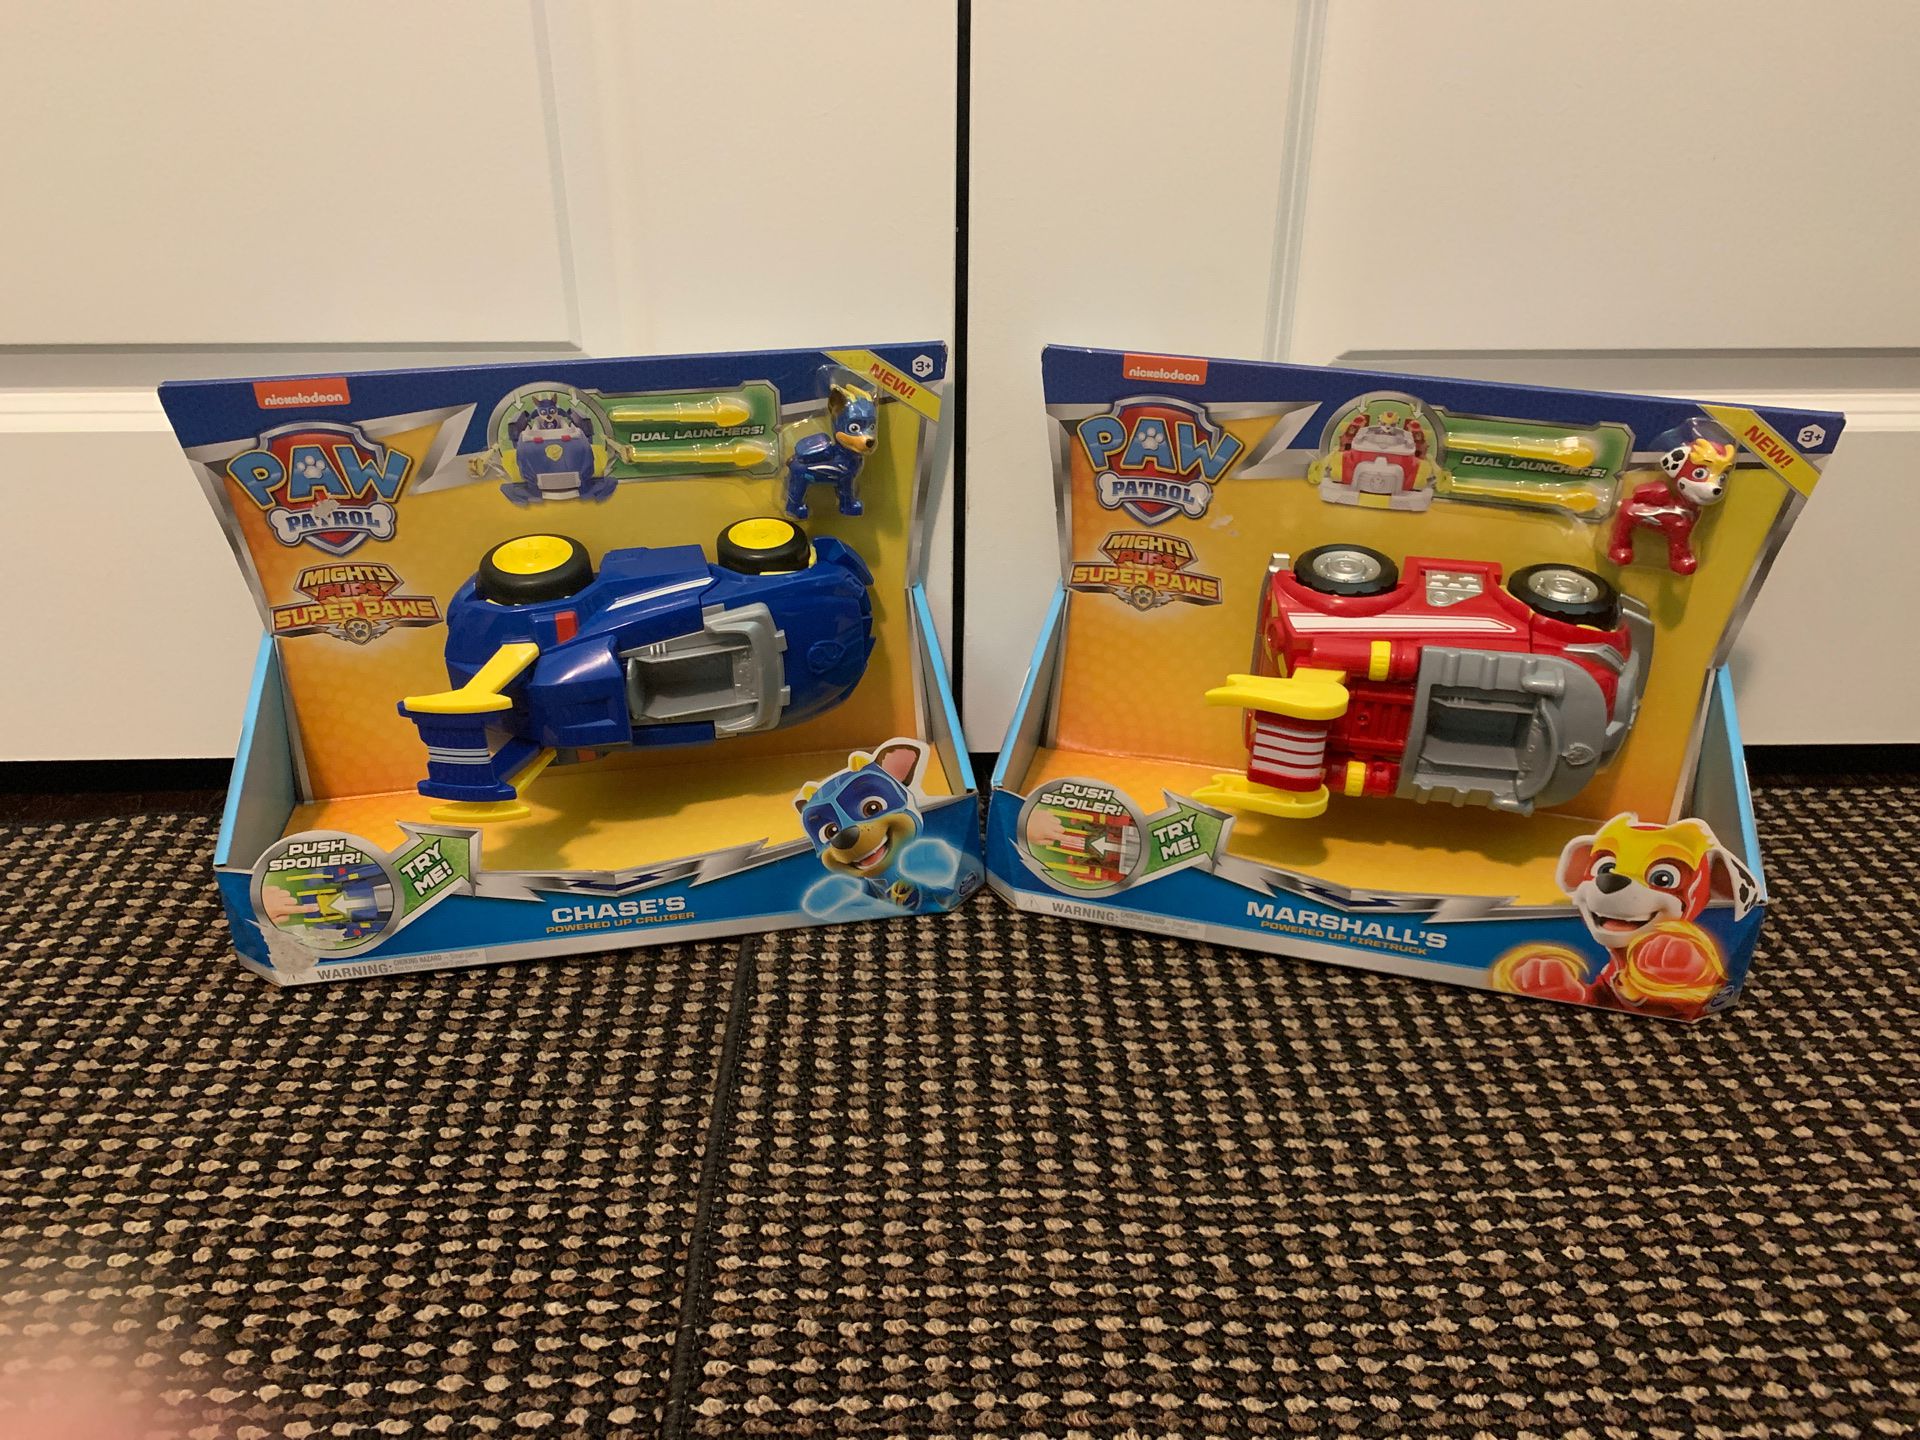 Two Paw Patrol Mighty Super Paws